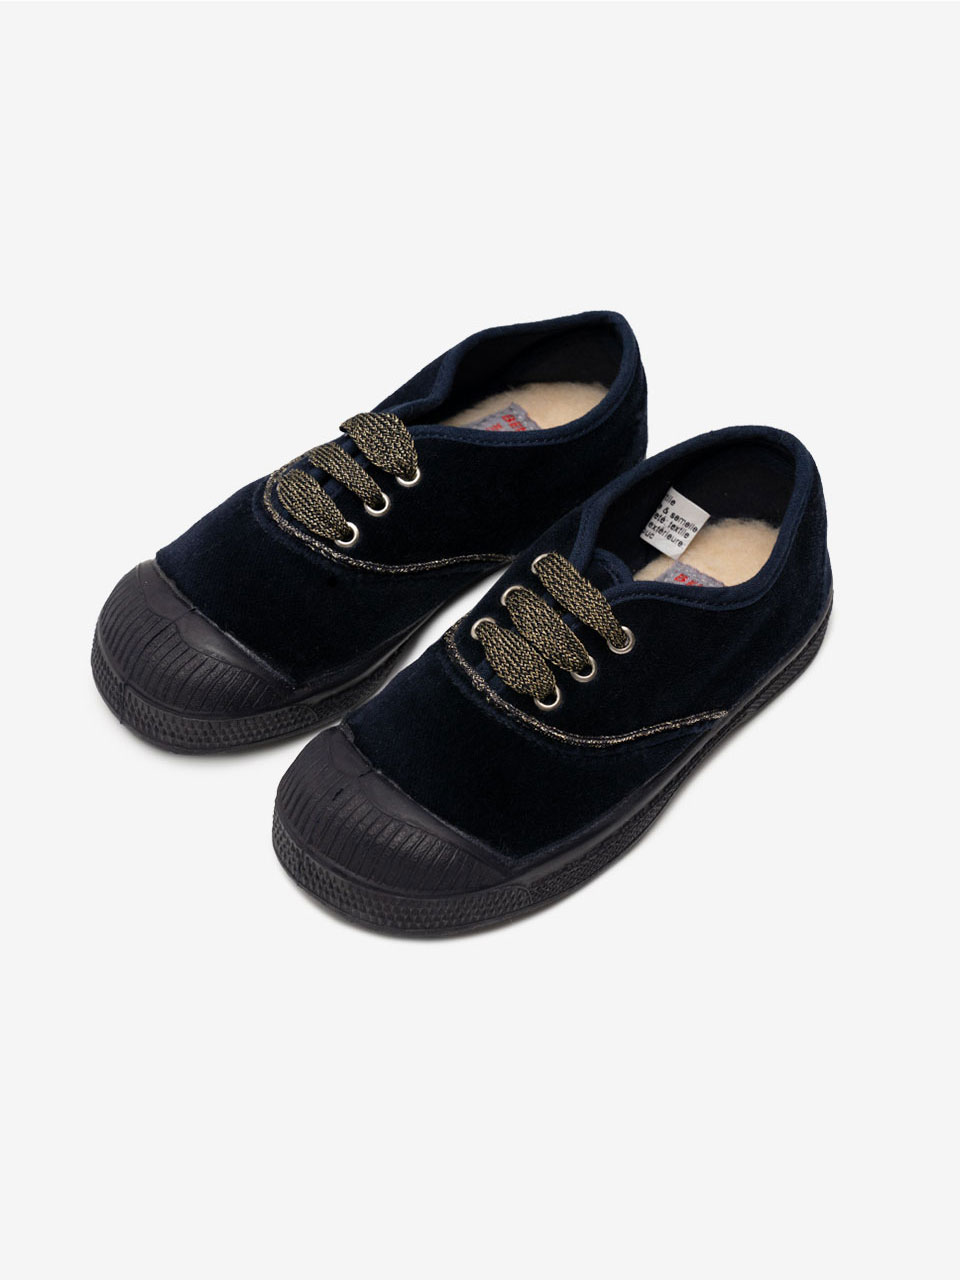 KID LIMITED PIPING - NAVY